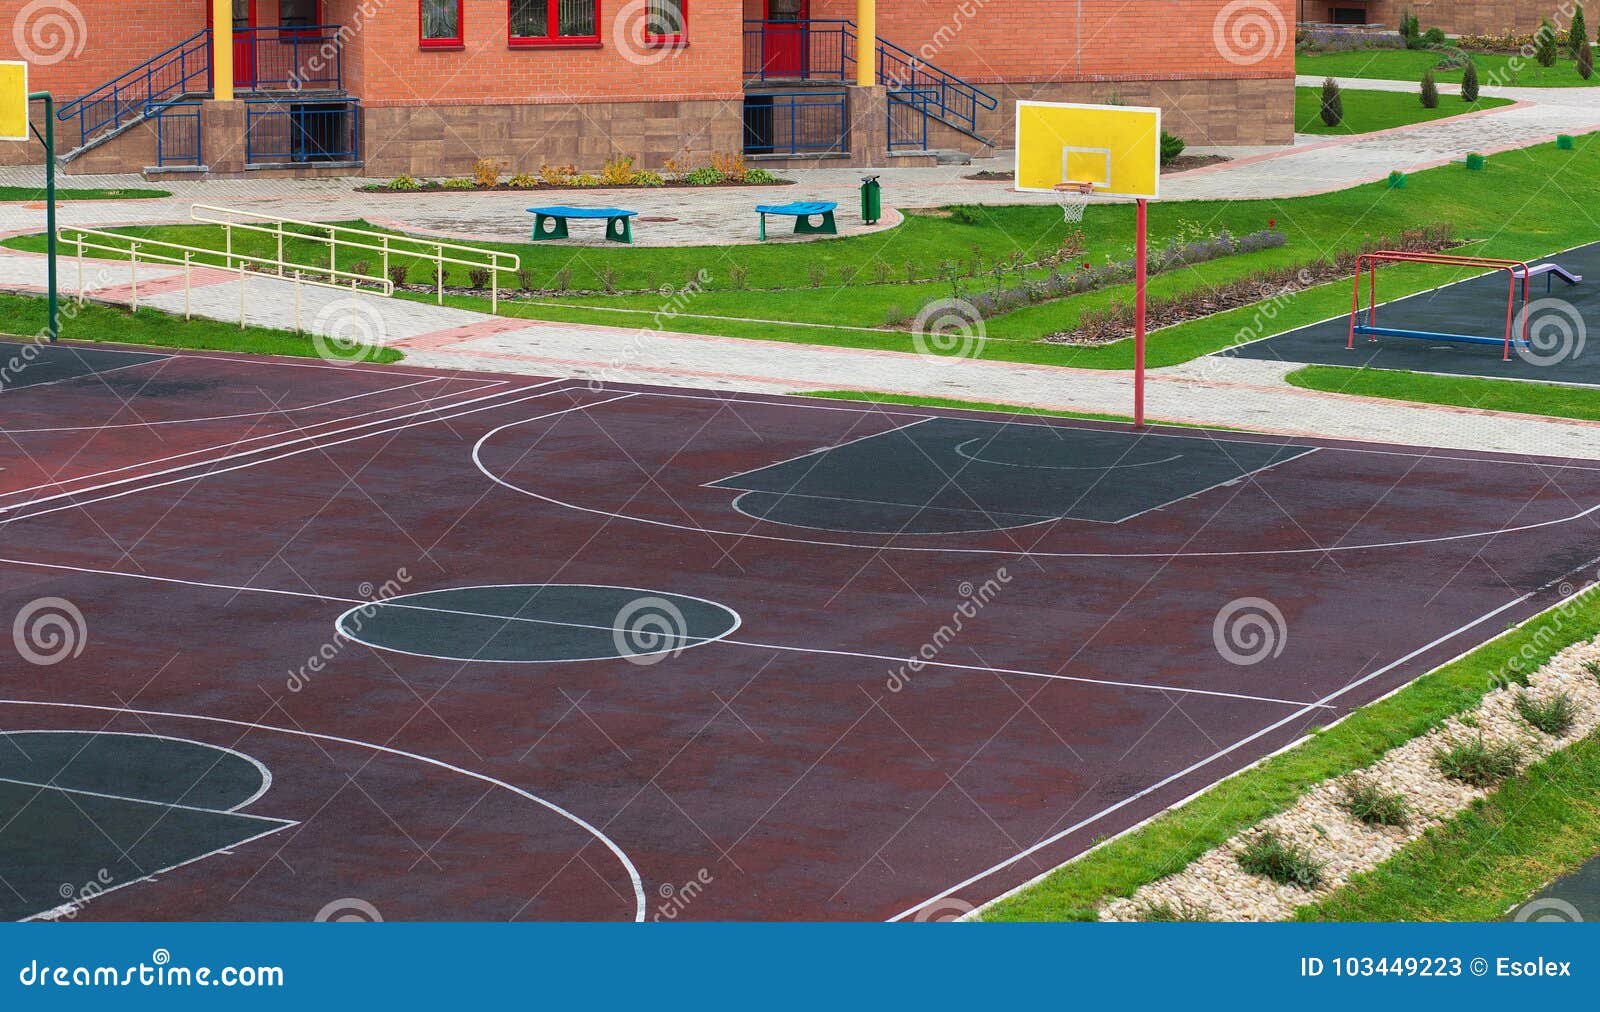 schoolyard with a playground for basketball.